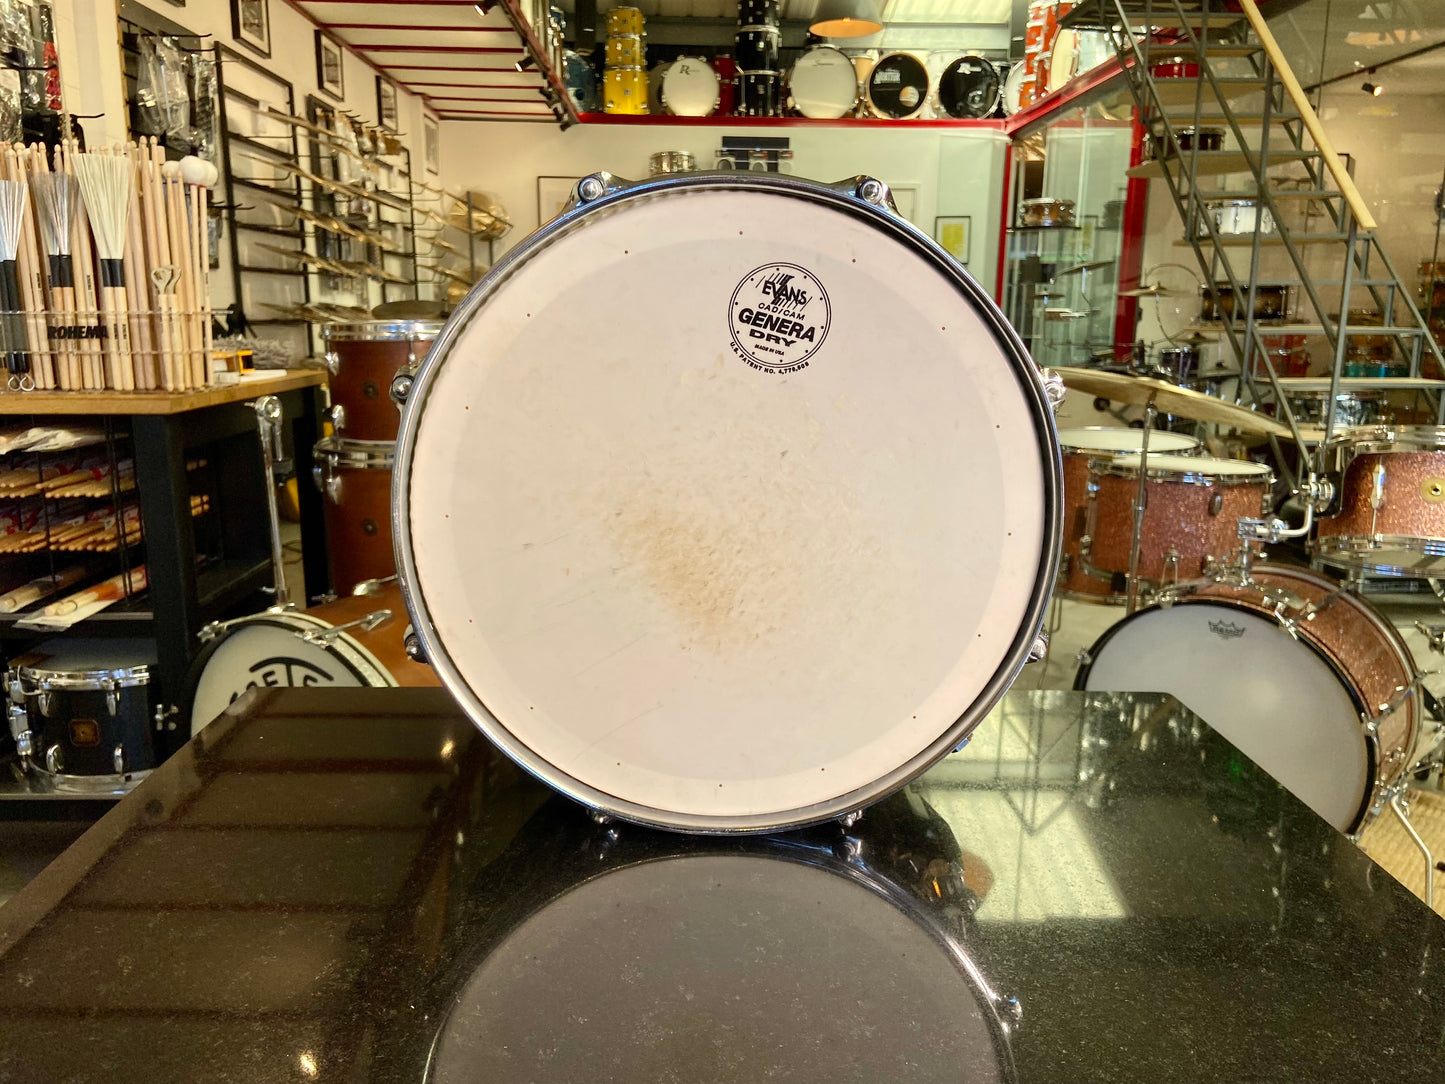 Noble & Cooley 13" x 6" Snare Drum